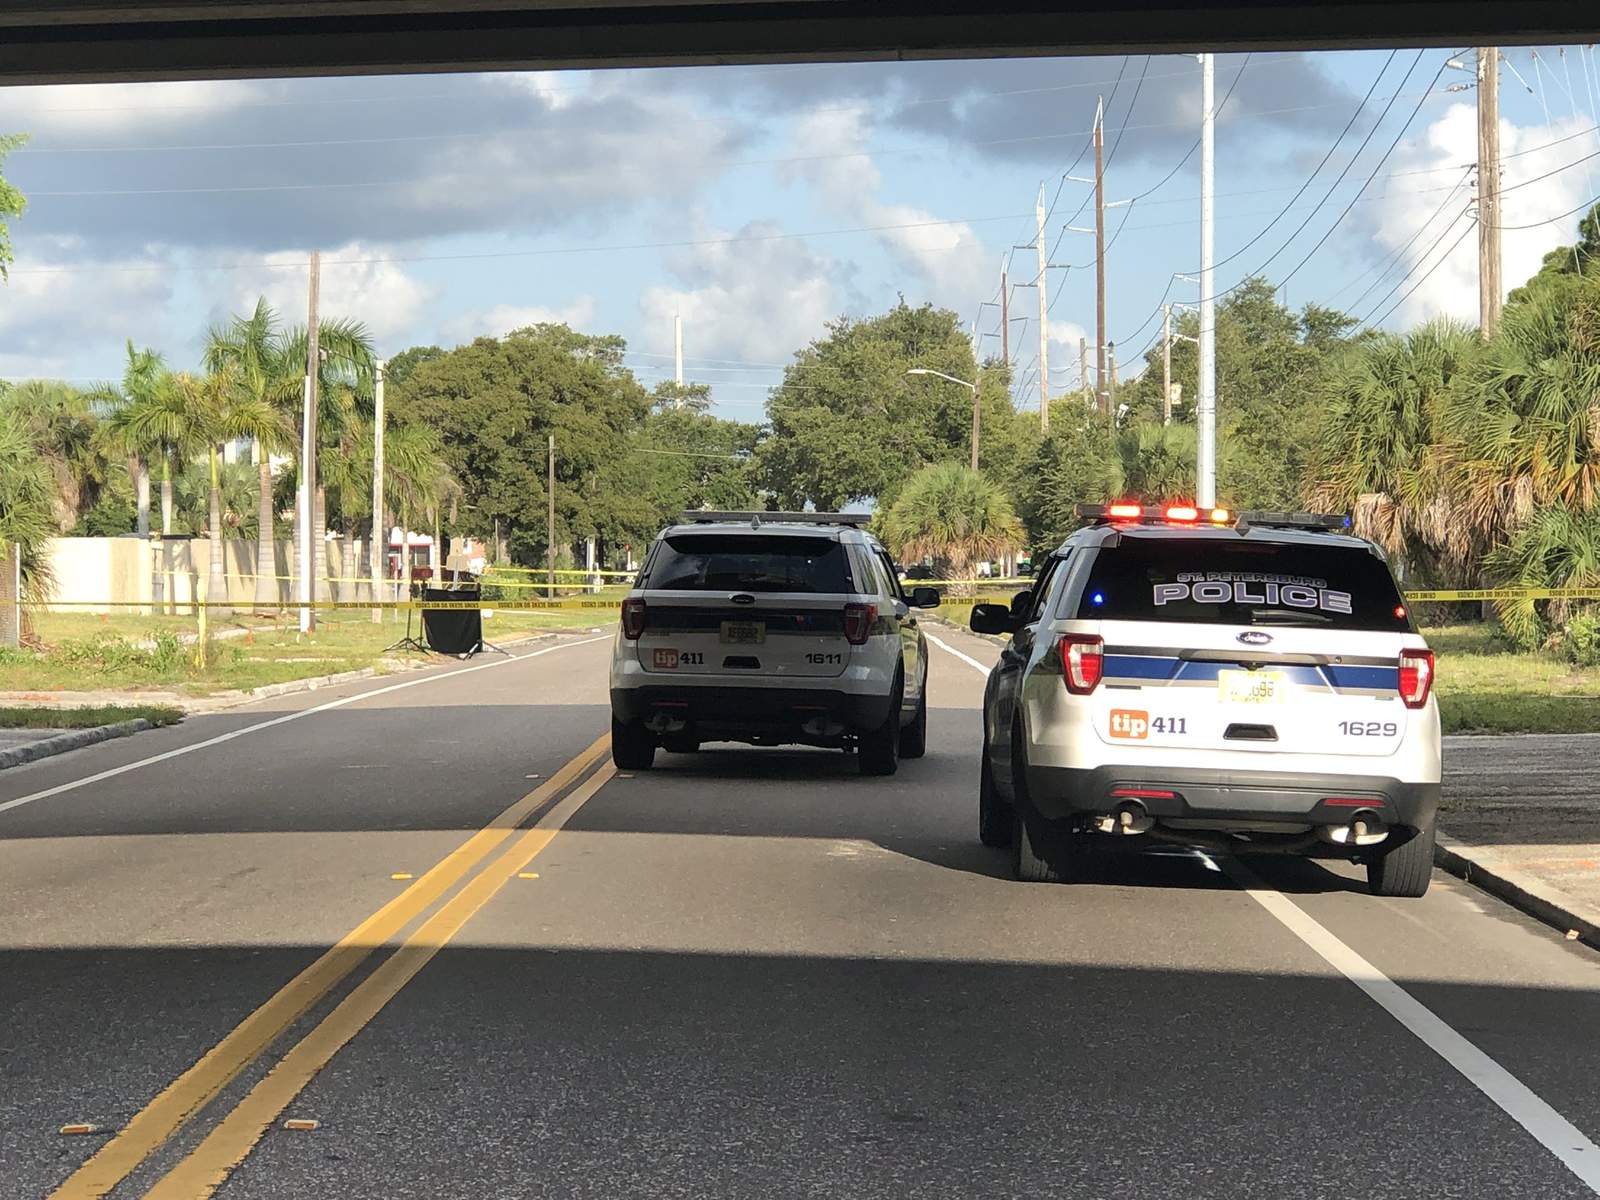 Human head found on side of Florida road